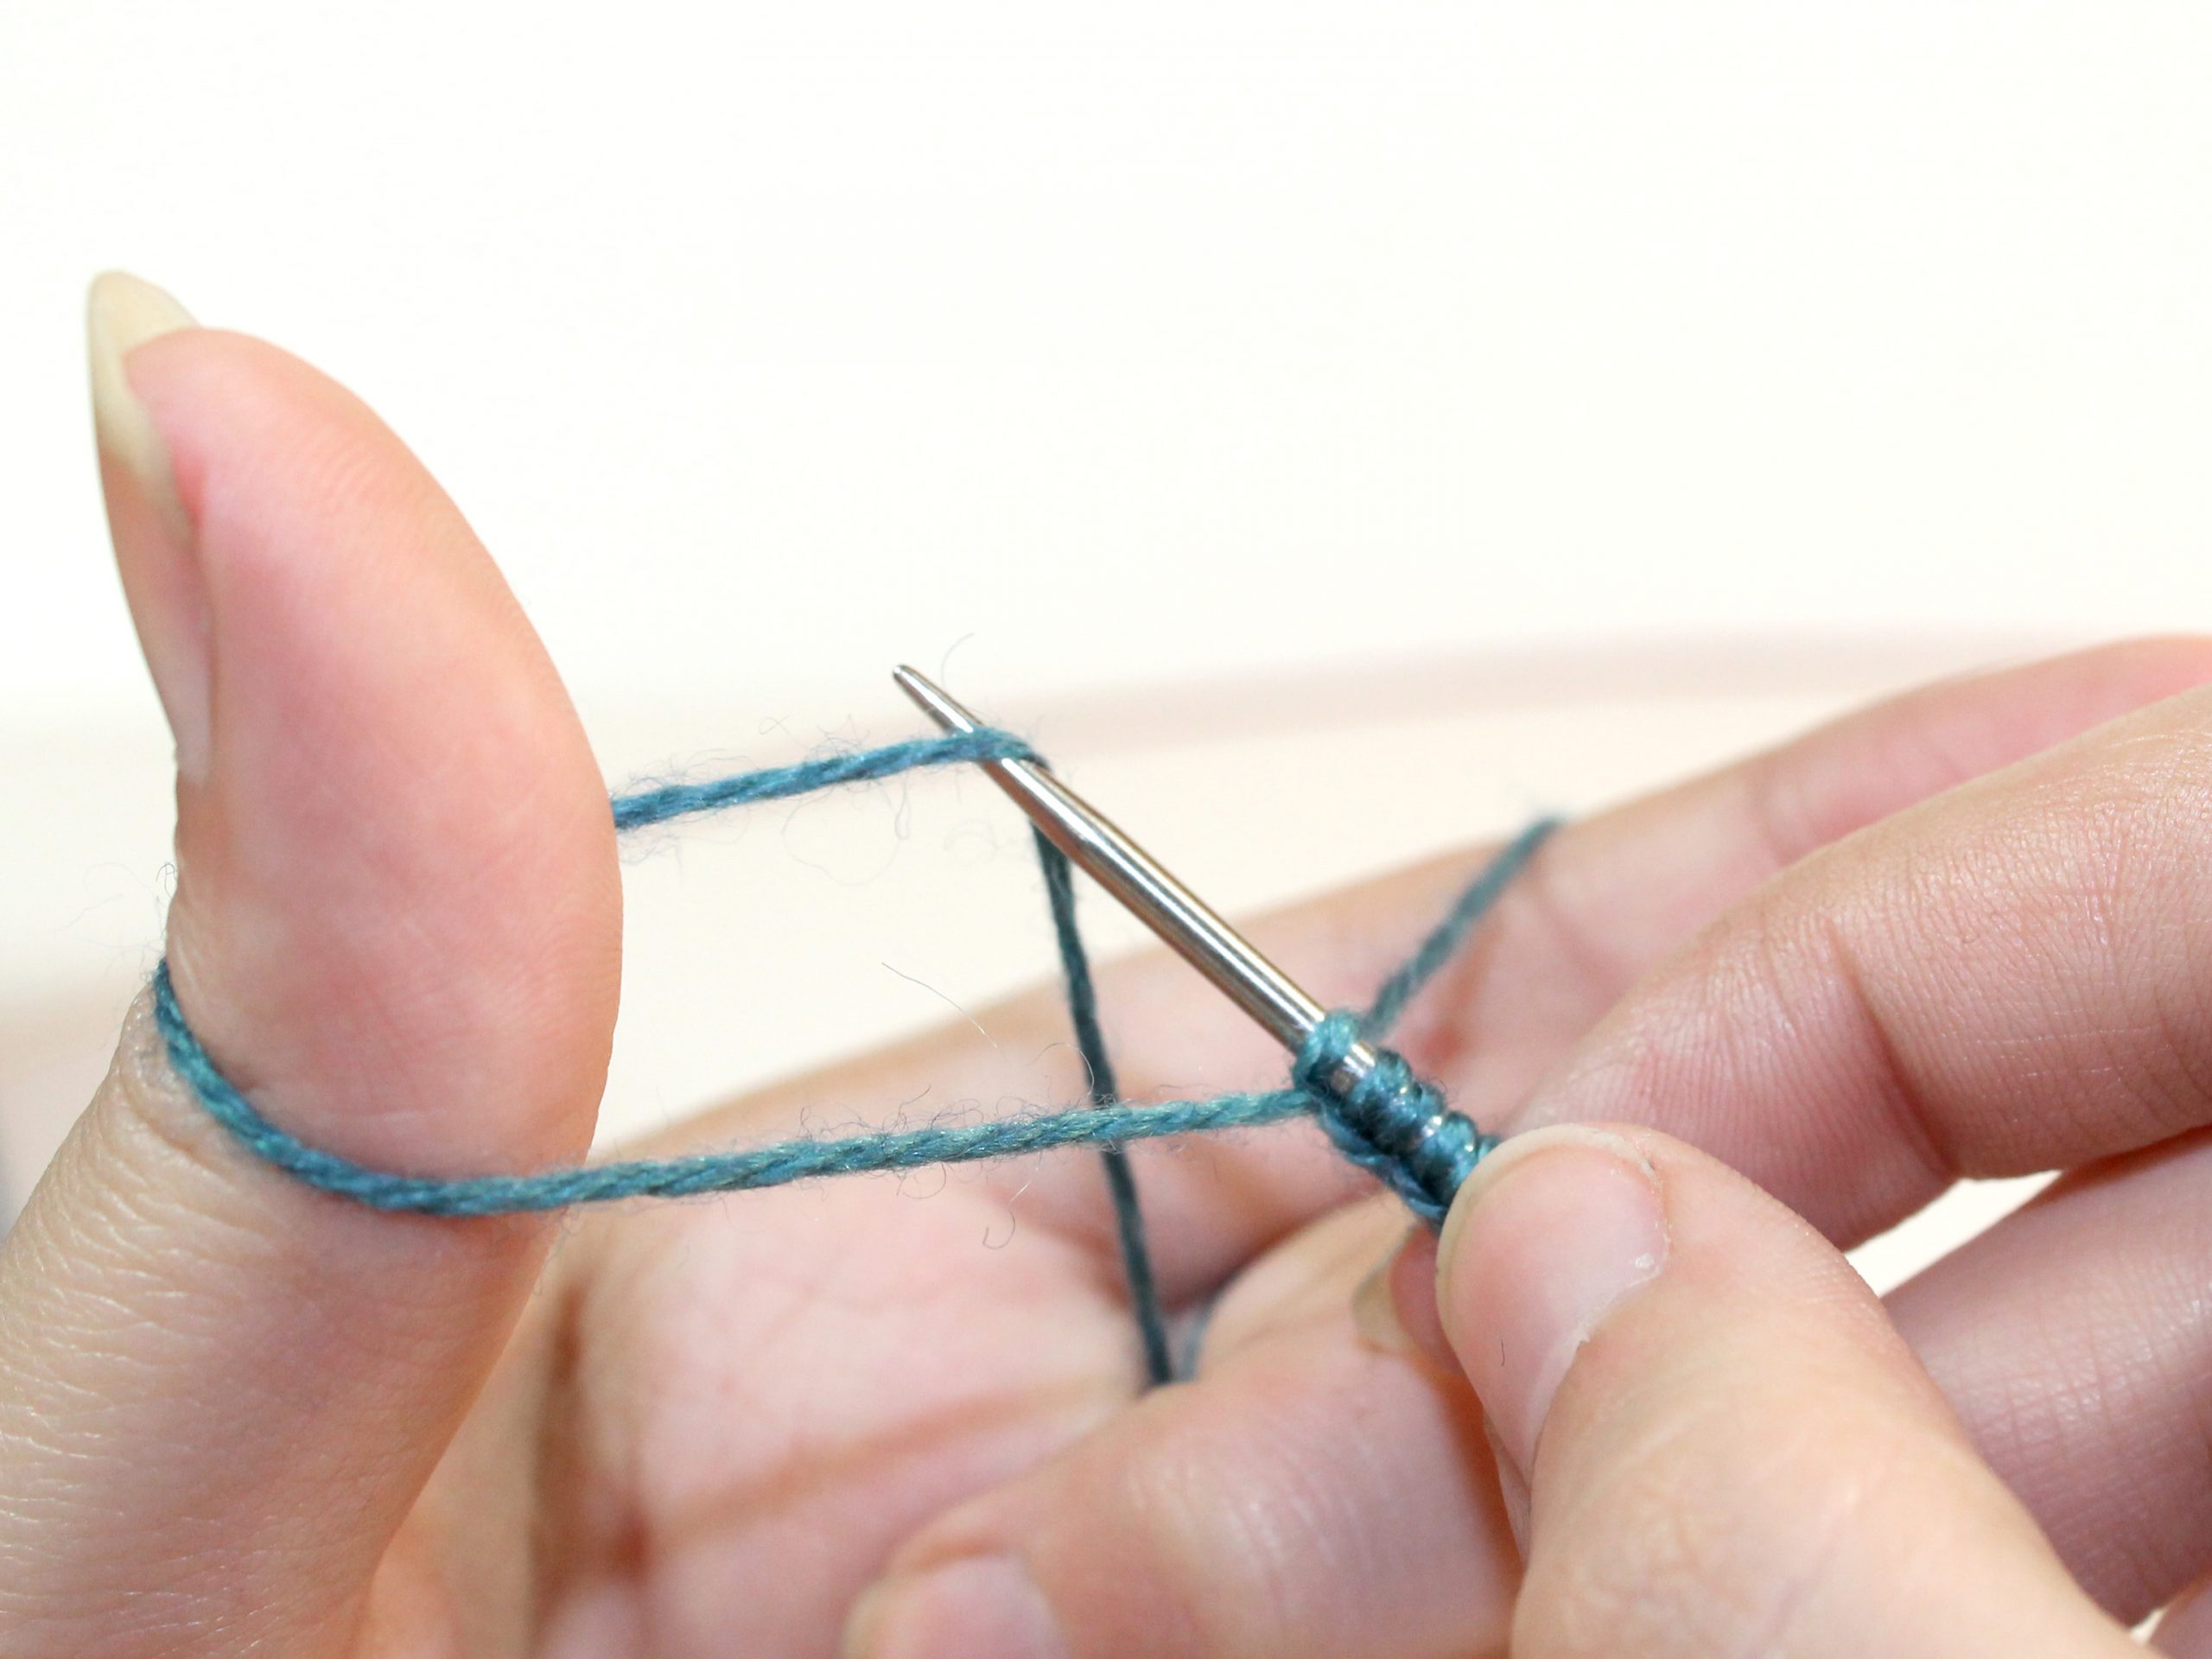 The needle tip lifts the yarn that rubs between the ring finger and thumb